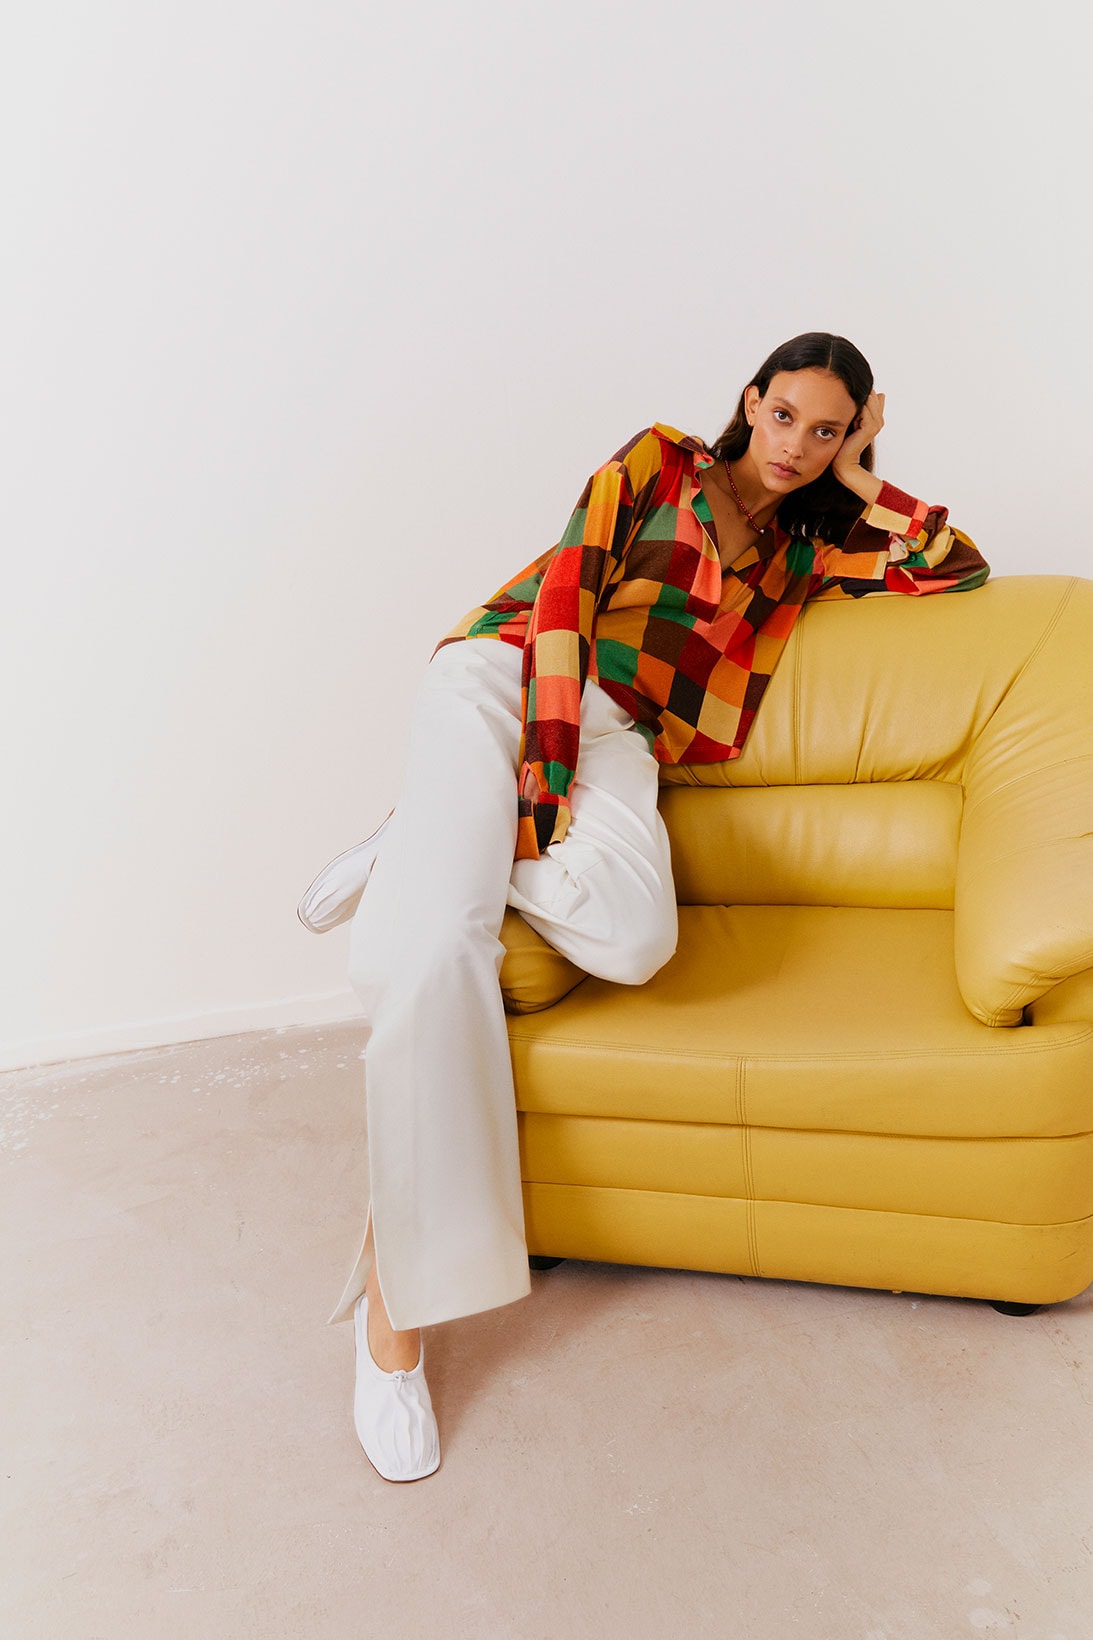 Anim Fall/Winter 2021 Collection Campaign Knit Sweater Sofa White Trousers